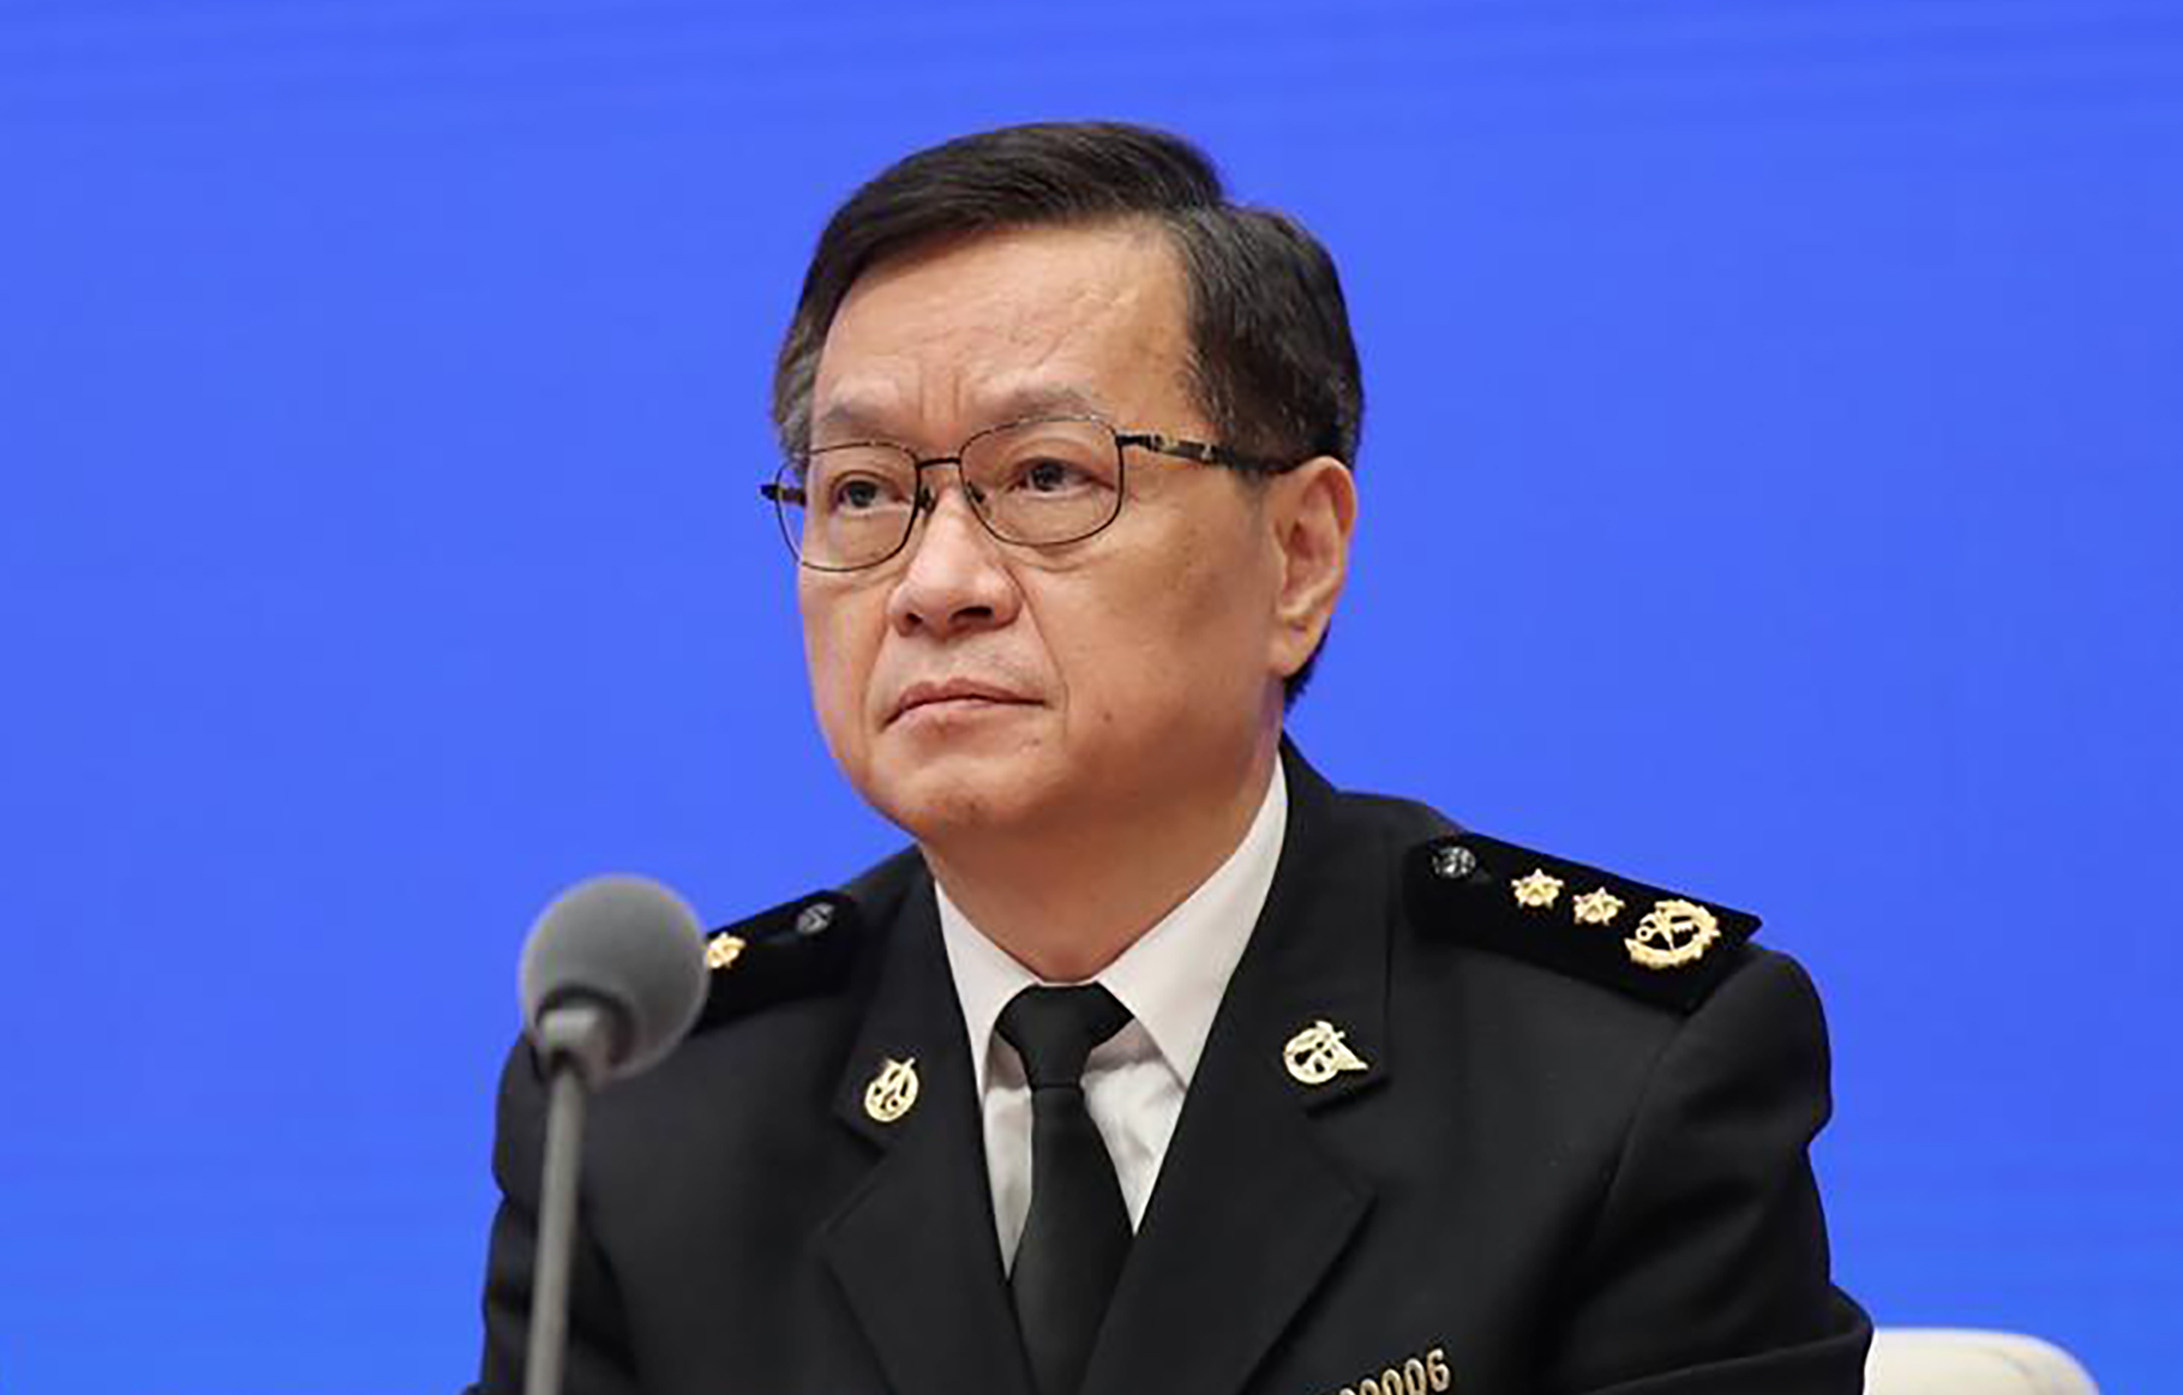 Zhang Jiwen, a senior official with the Central Commission for Discipline Inspection, says officials and cadres on the diplomatic front lines are at greater risk of infiltration. Photo: China State Council Information Office